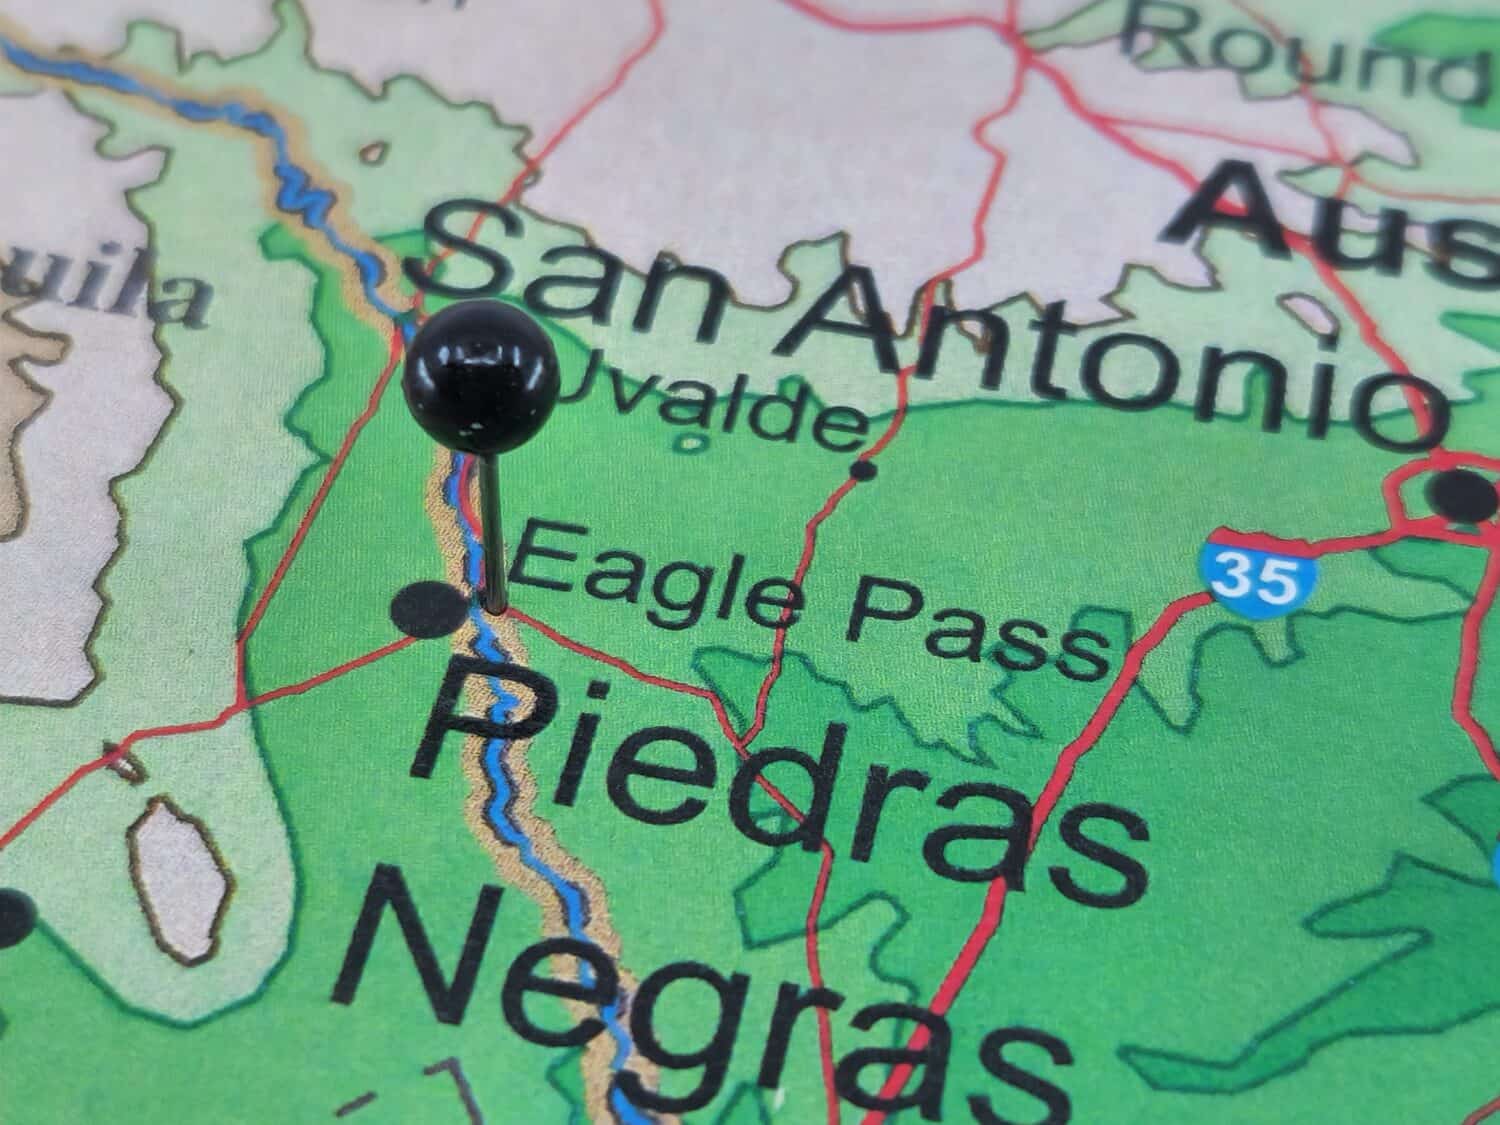 Eagle Pass, Texas marked by a black map tack. The City of Eagle Pass is the county seat of Maverick County, TX.